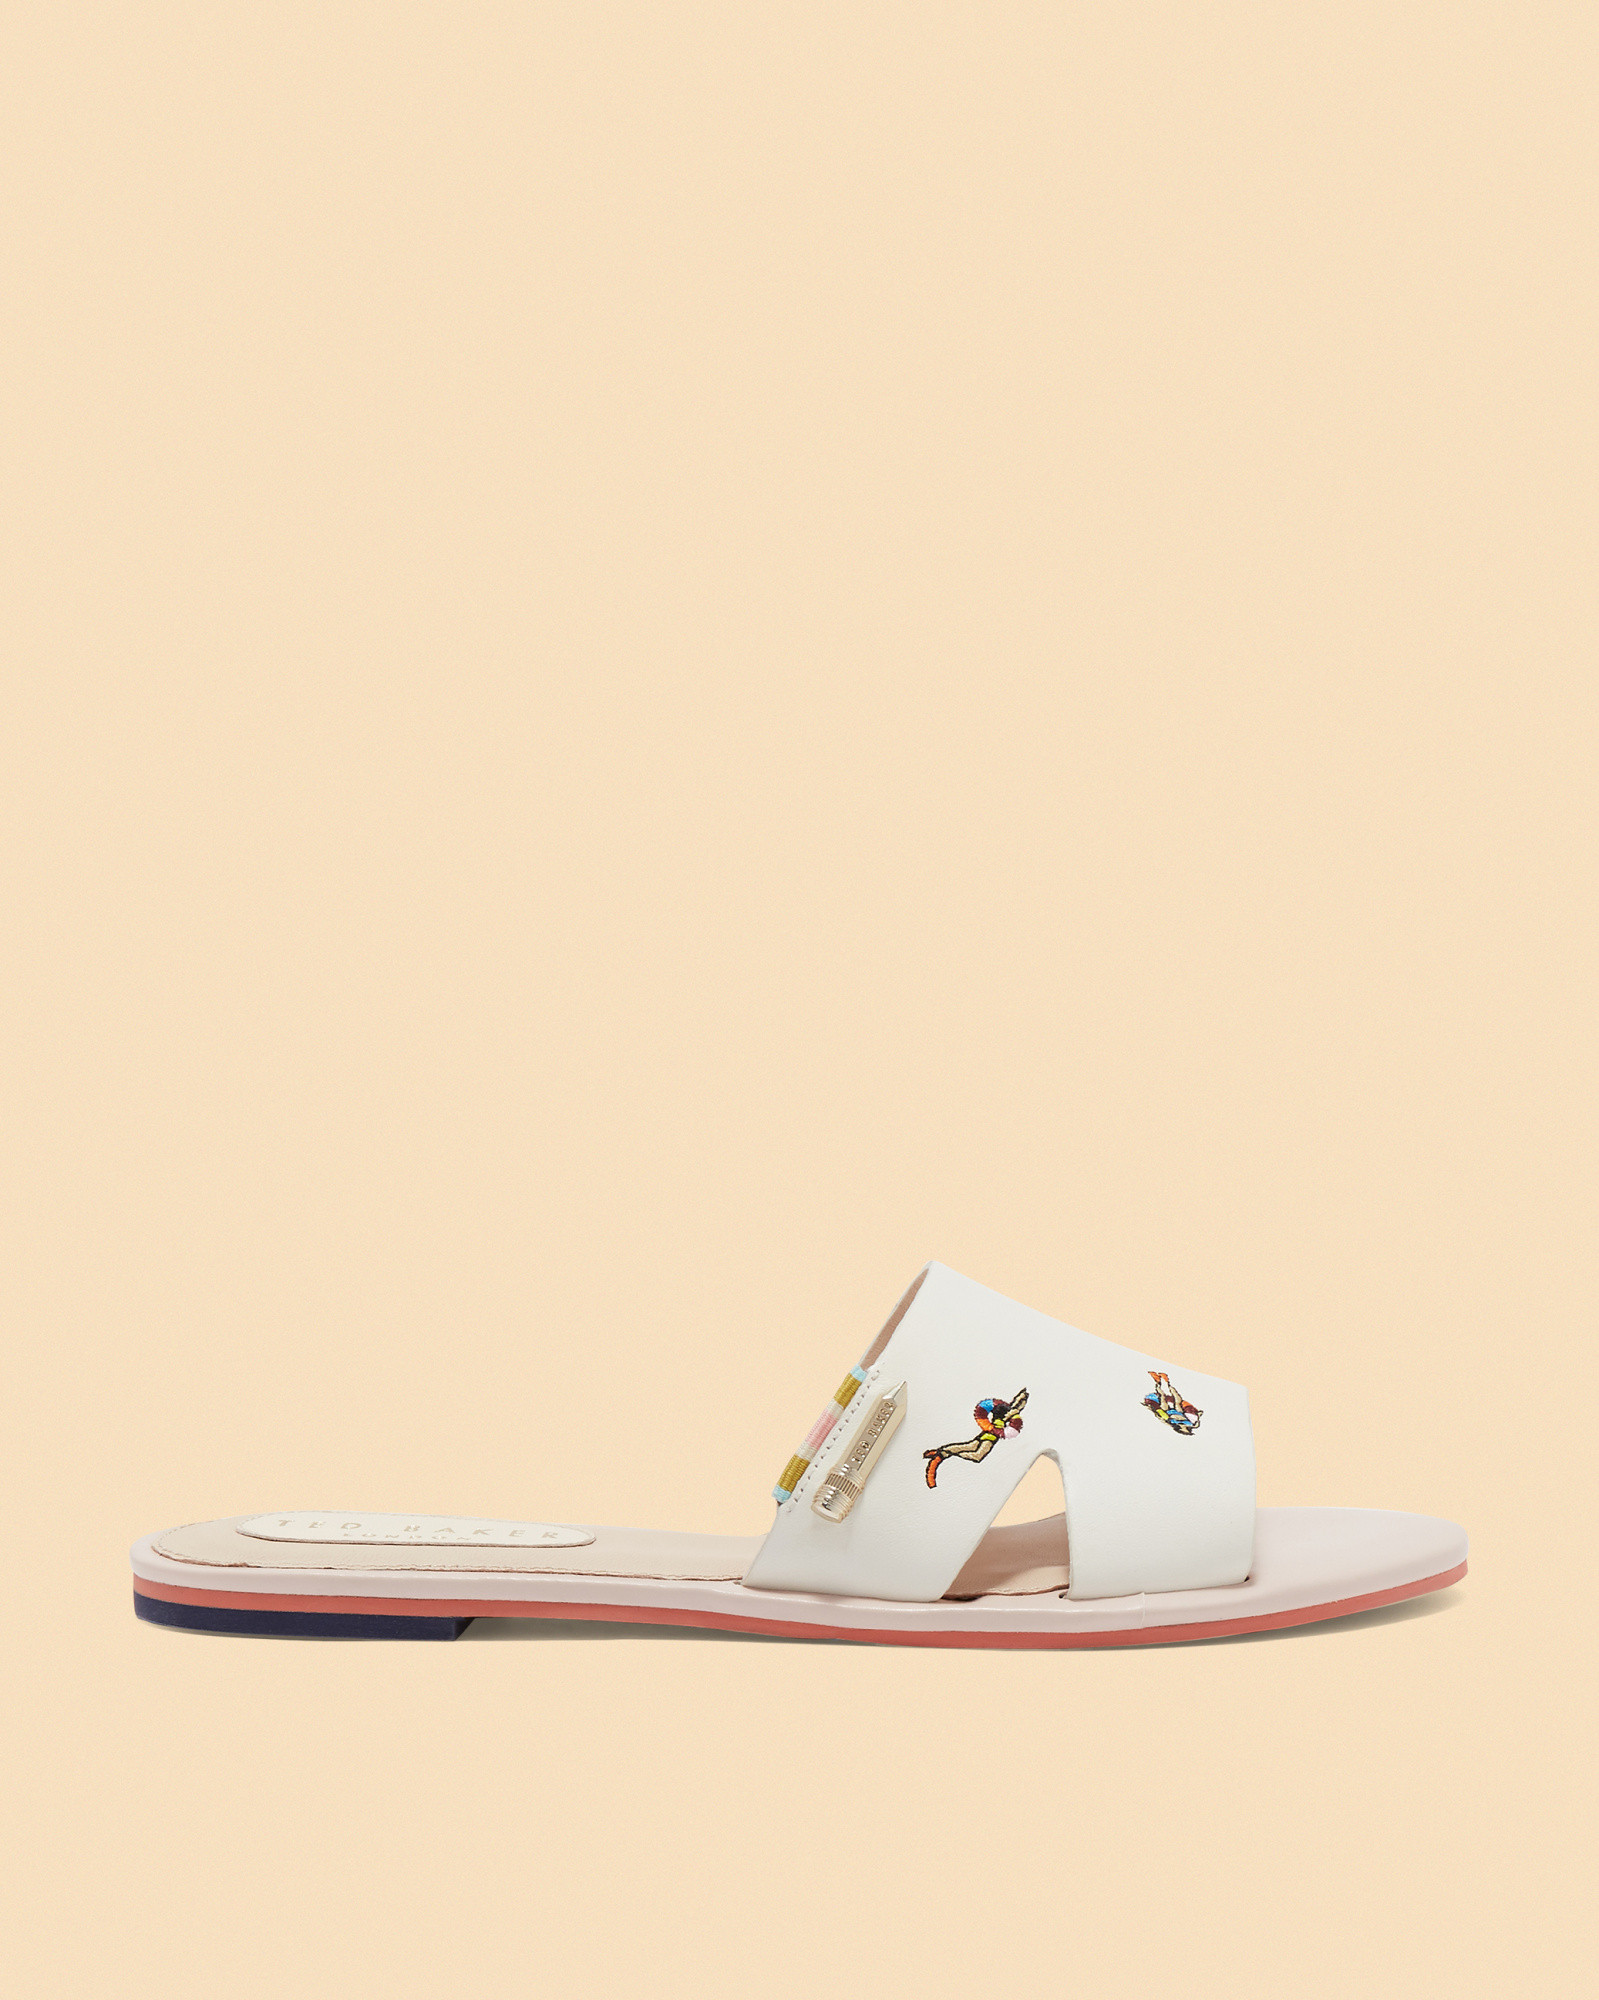 MAIRIN Swimmers embroidered sliders